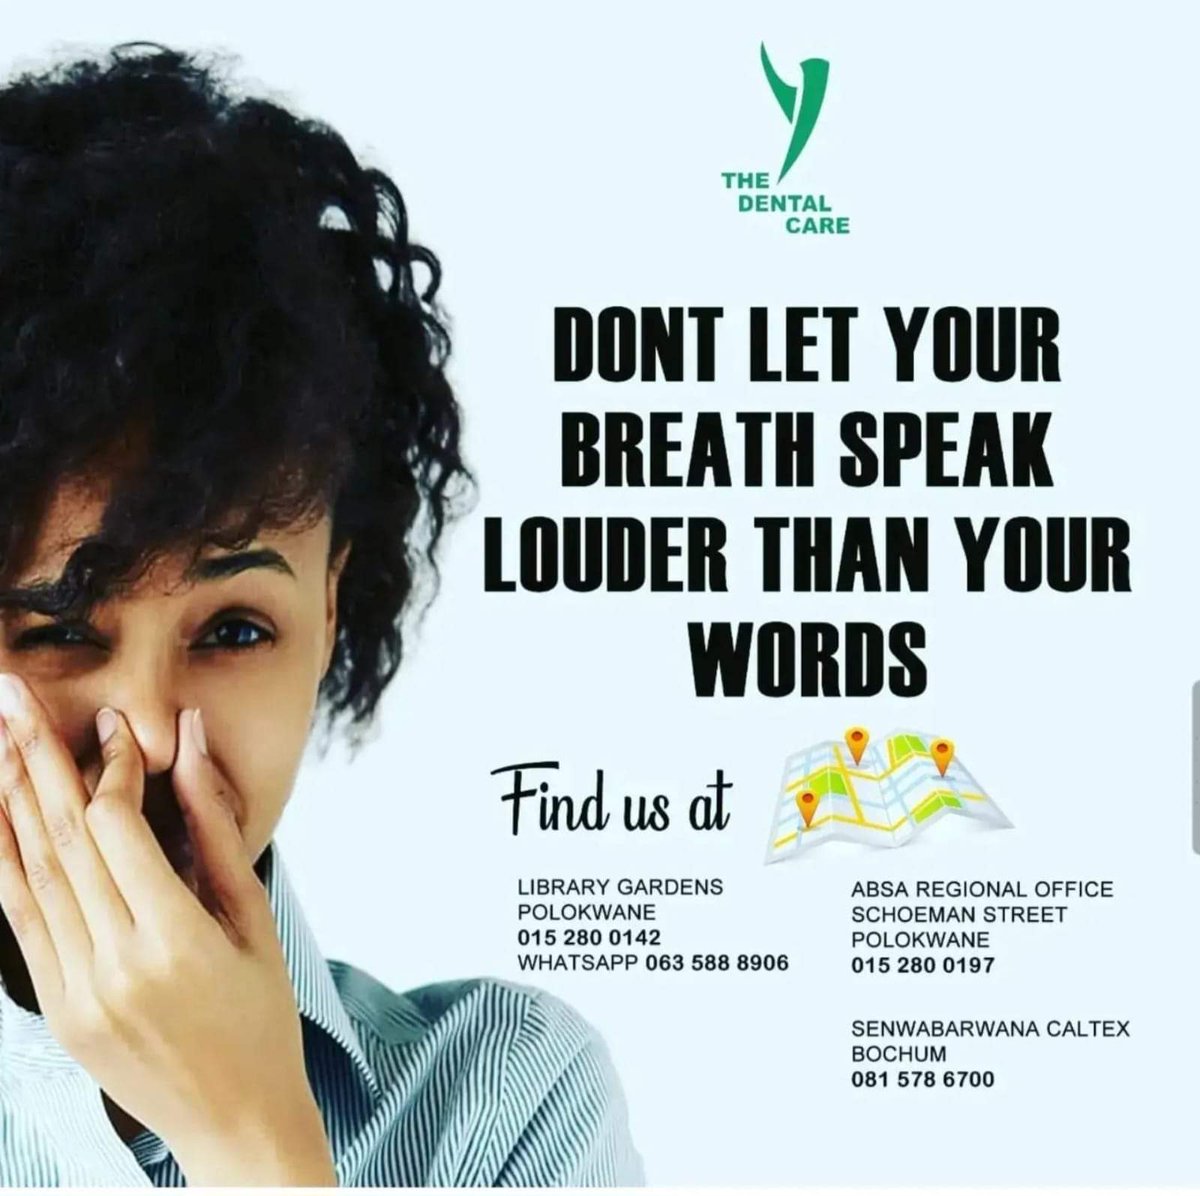 Is bad breath holding you back? You might not even realize it! Take charge of your dental health today and discover the difference. Book your appointment now! #DentalCare #FreshBreath #OralHealth sekodental.co.za